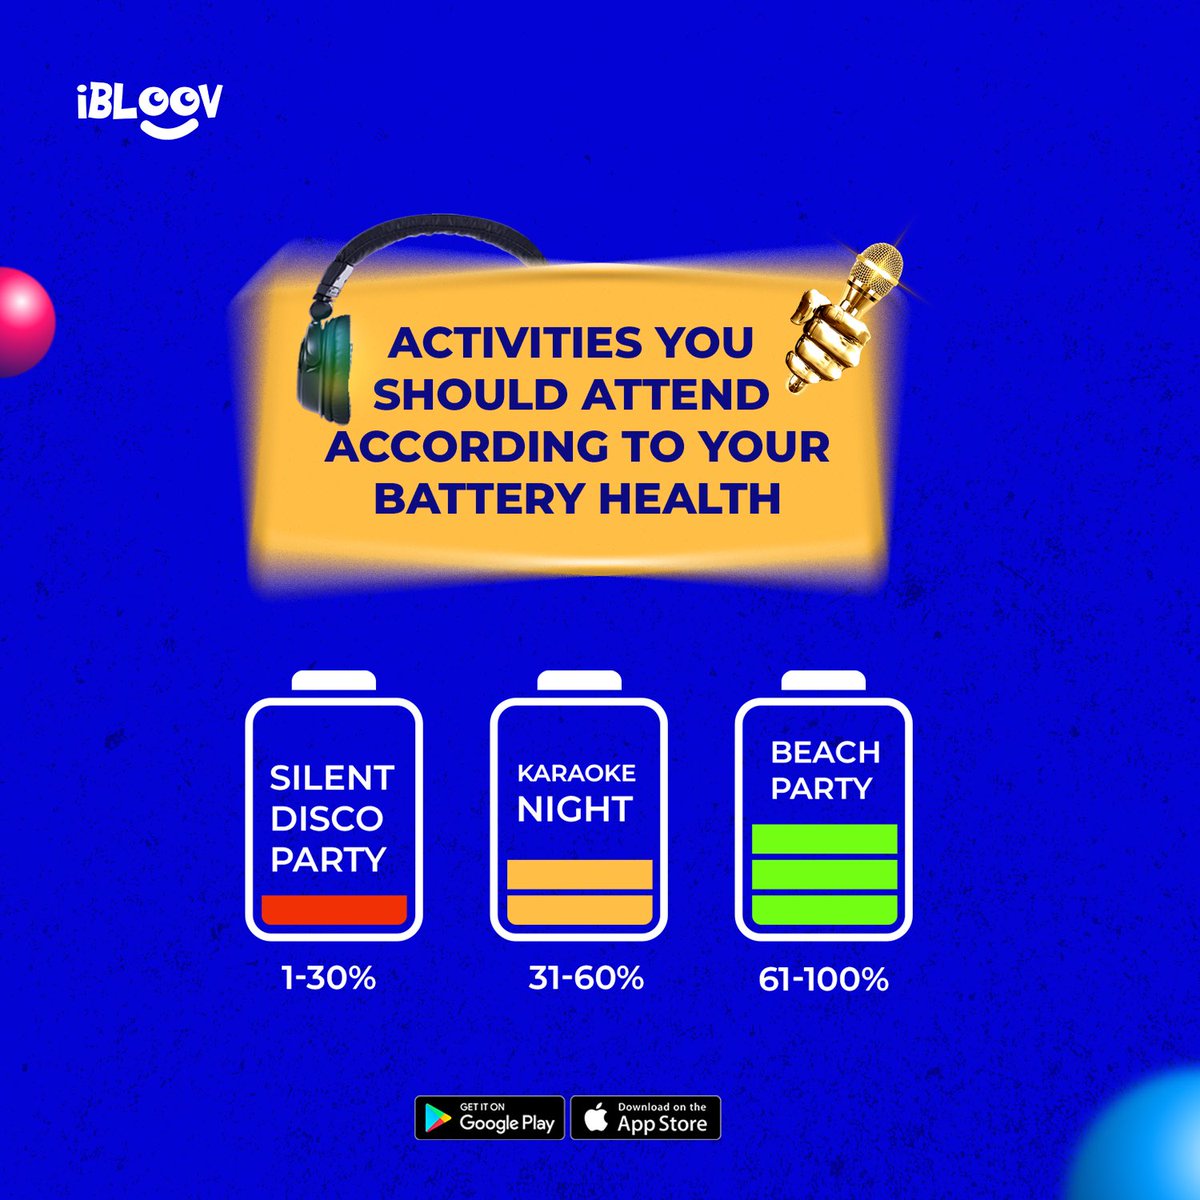 The event that falls under your current battery health is the event you should be attending this weekend.
 
Tell us what it is in the comments 😉
 
#ibloov #trivia #events #silentdisco #karaoke #eventstrivia